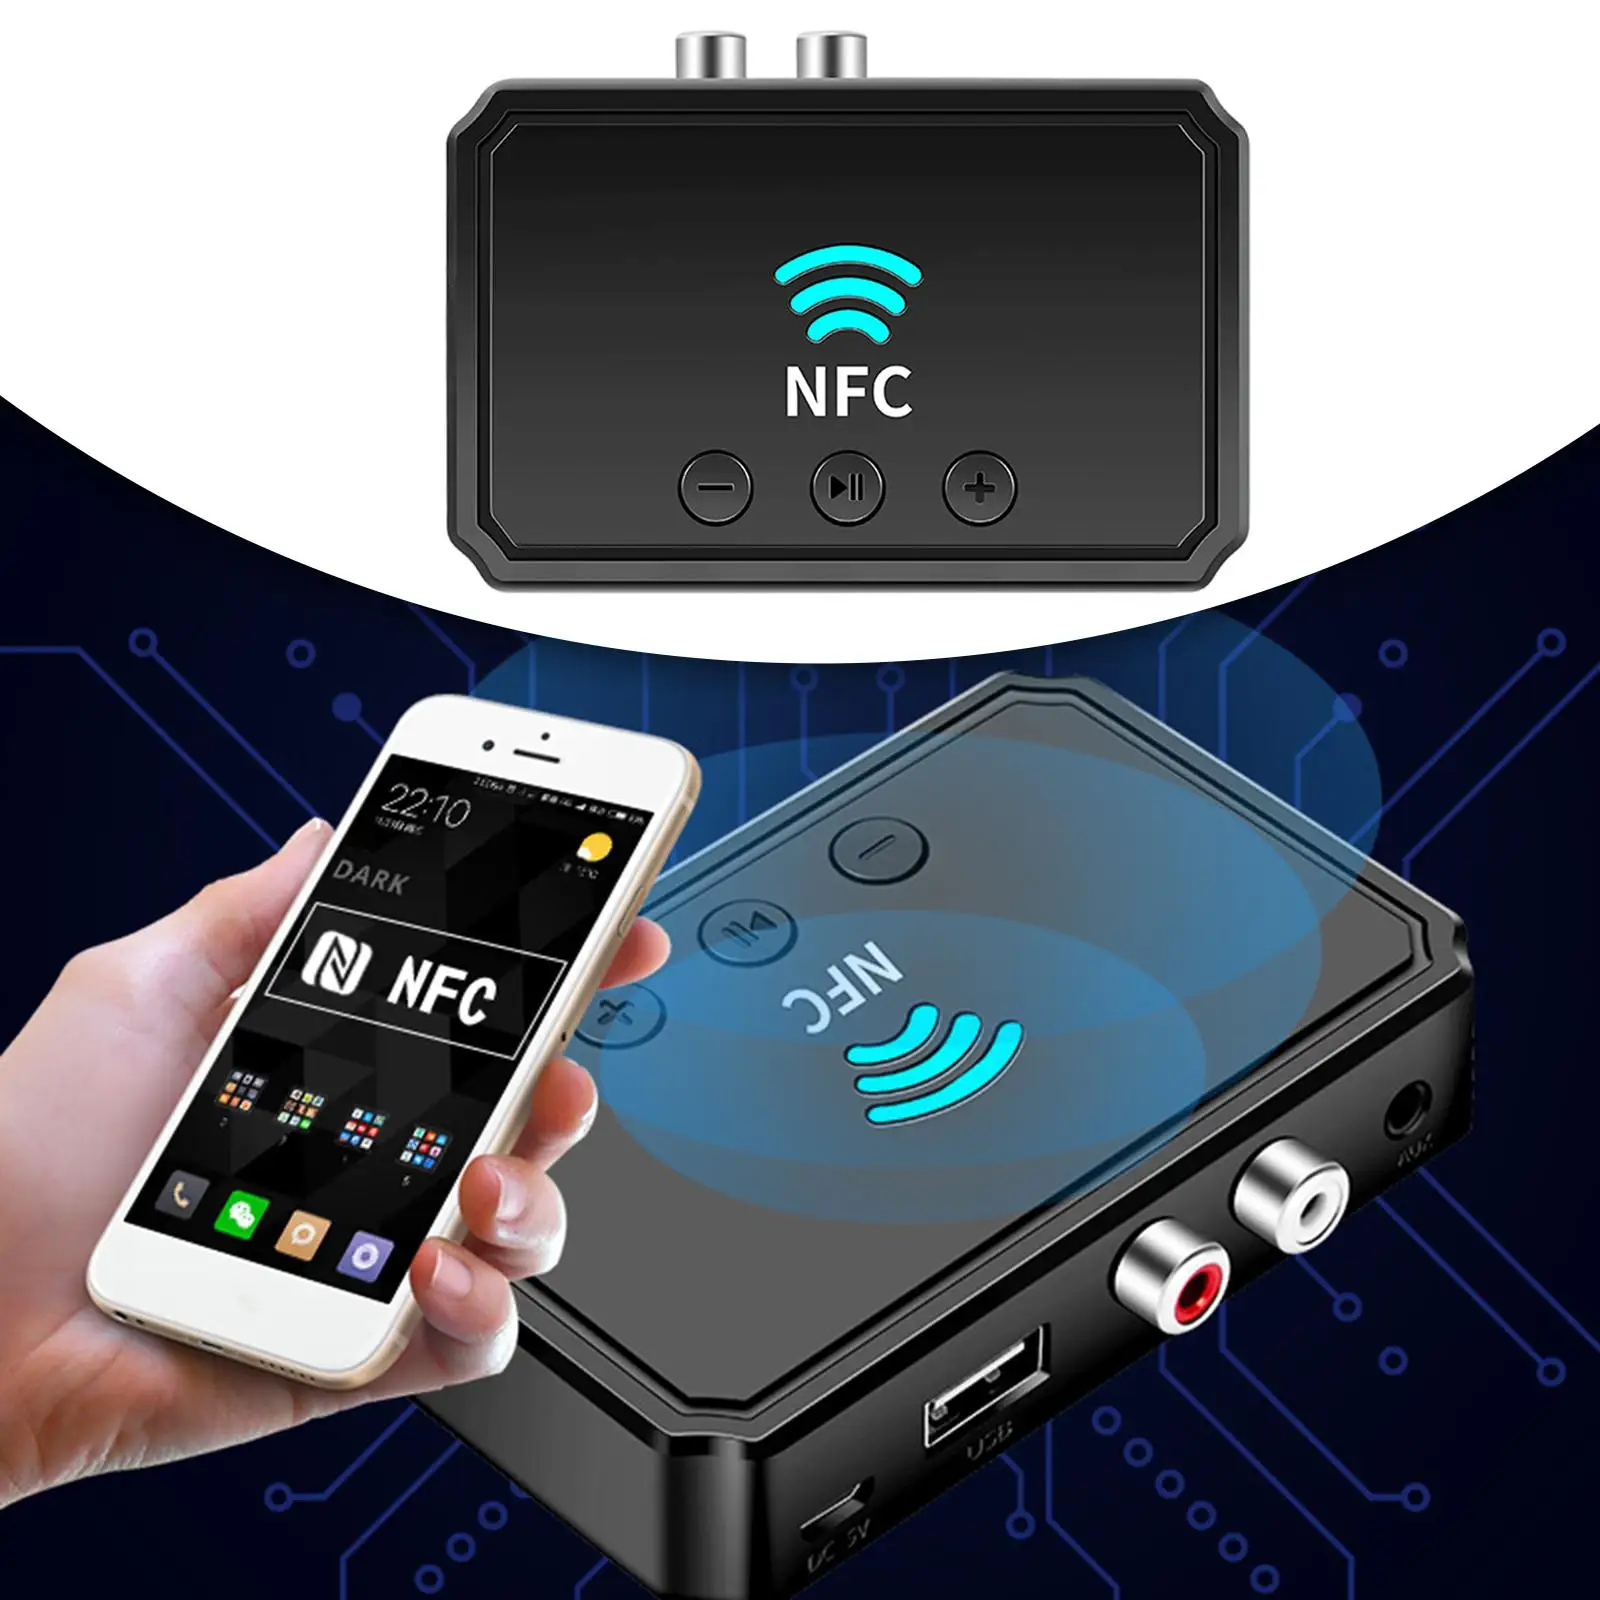 NFC Bluetooth 5.0 Audio Adapter Transmitter Support USB Sound System Stereo 3.5mm AUX or RCA Input Receiver for Phones TV Home